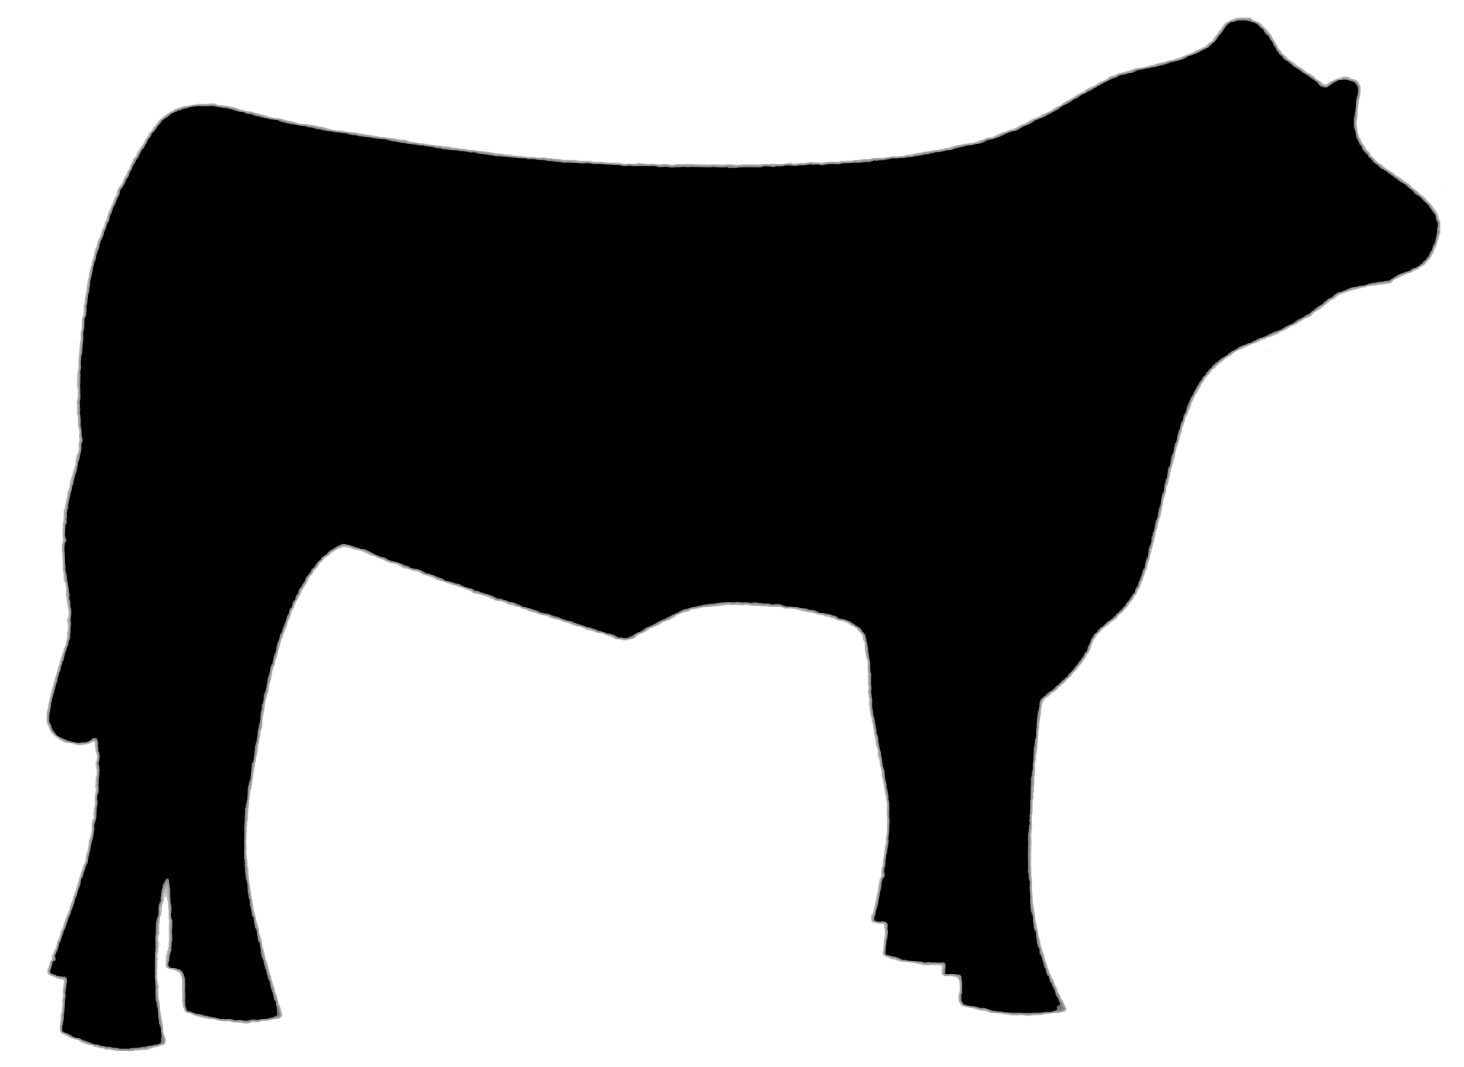 Dairy Cow Silhouettes 